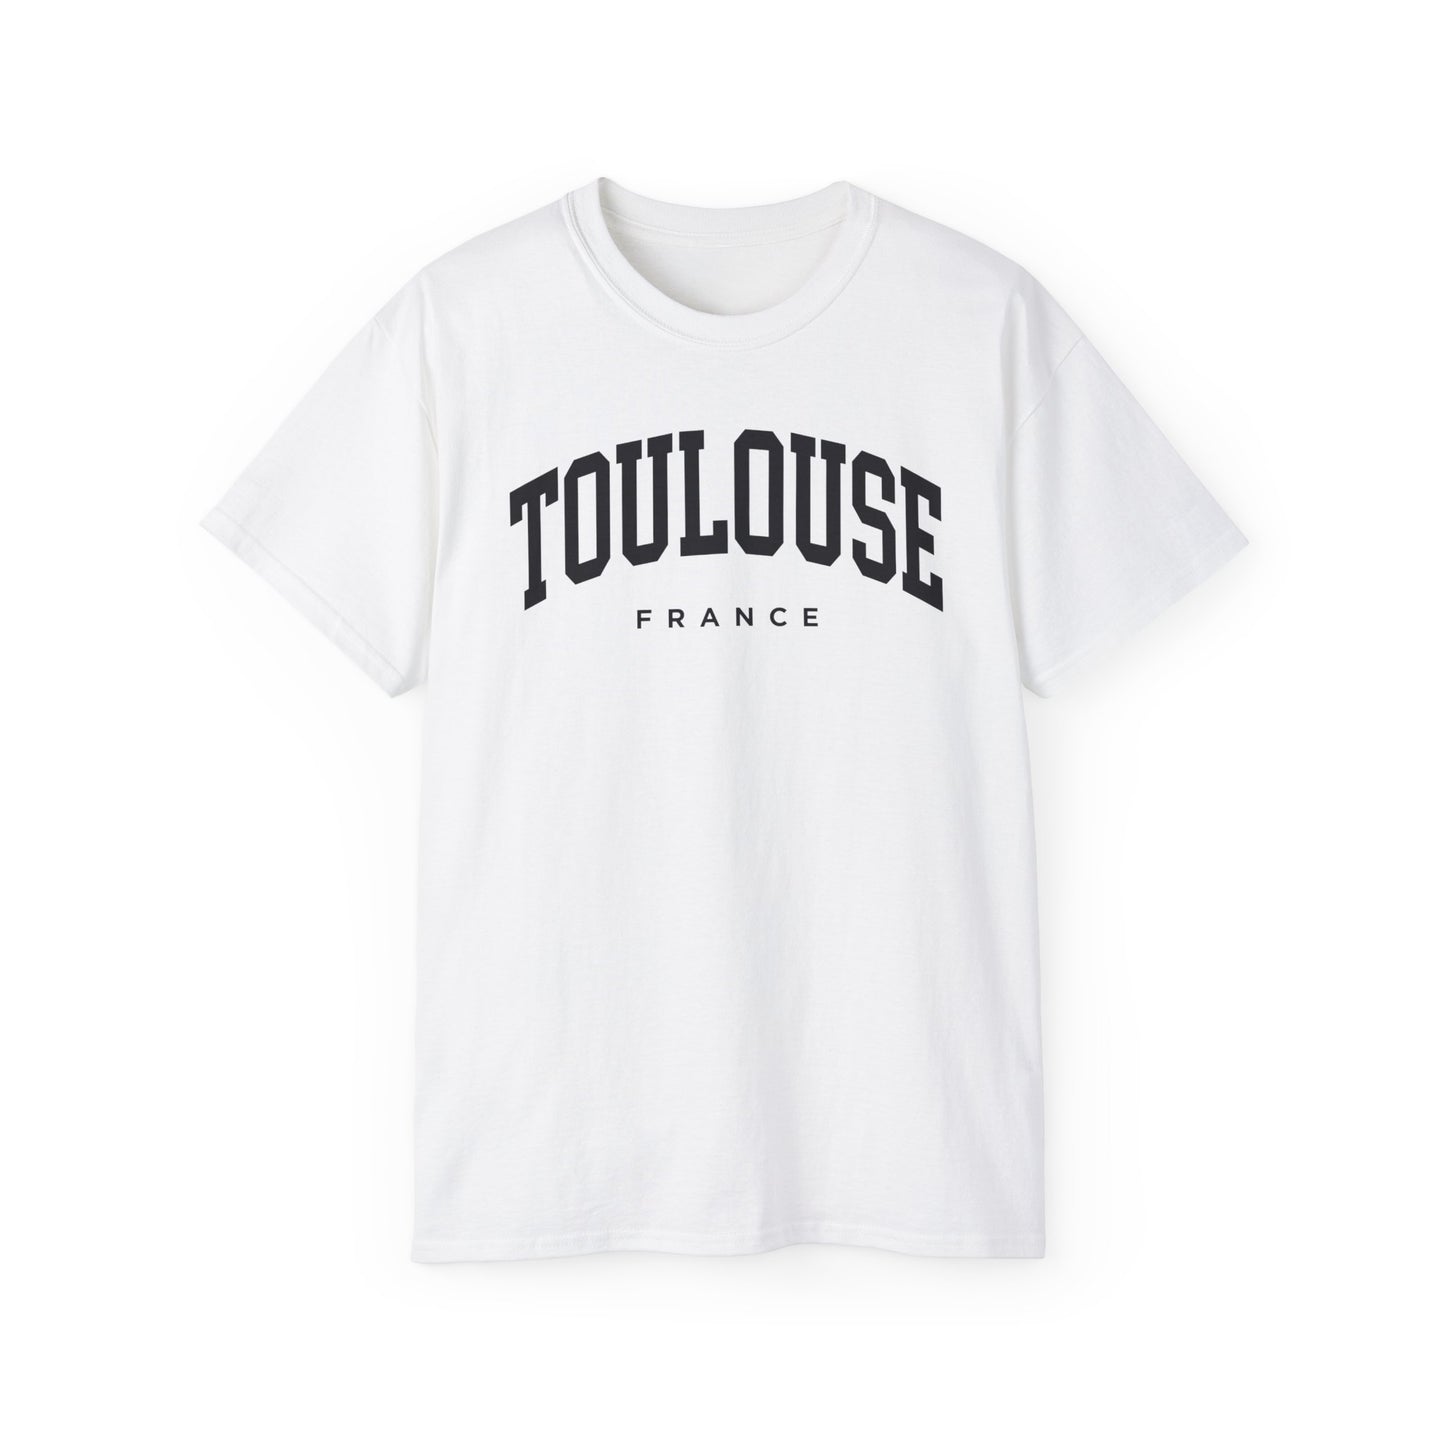 Toulouse France Tee